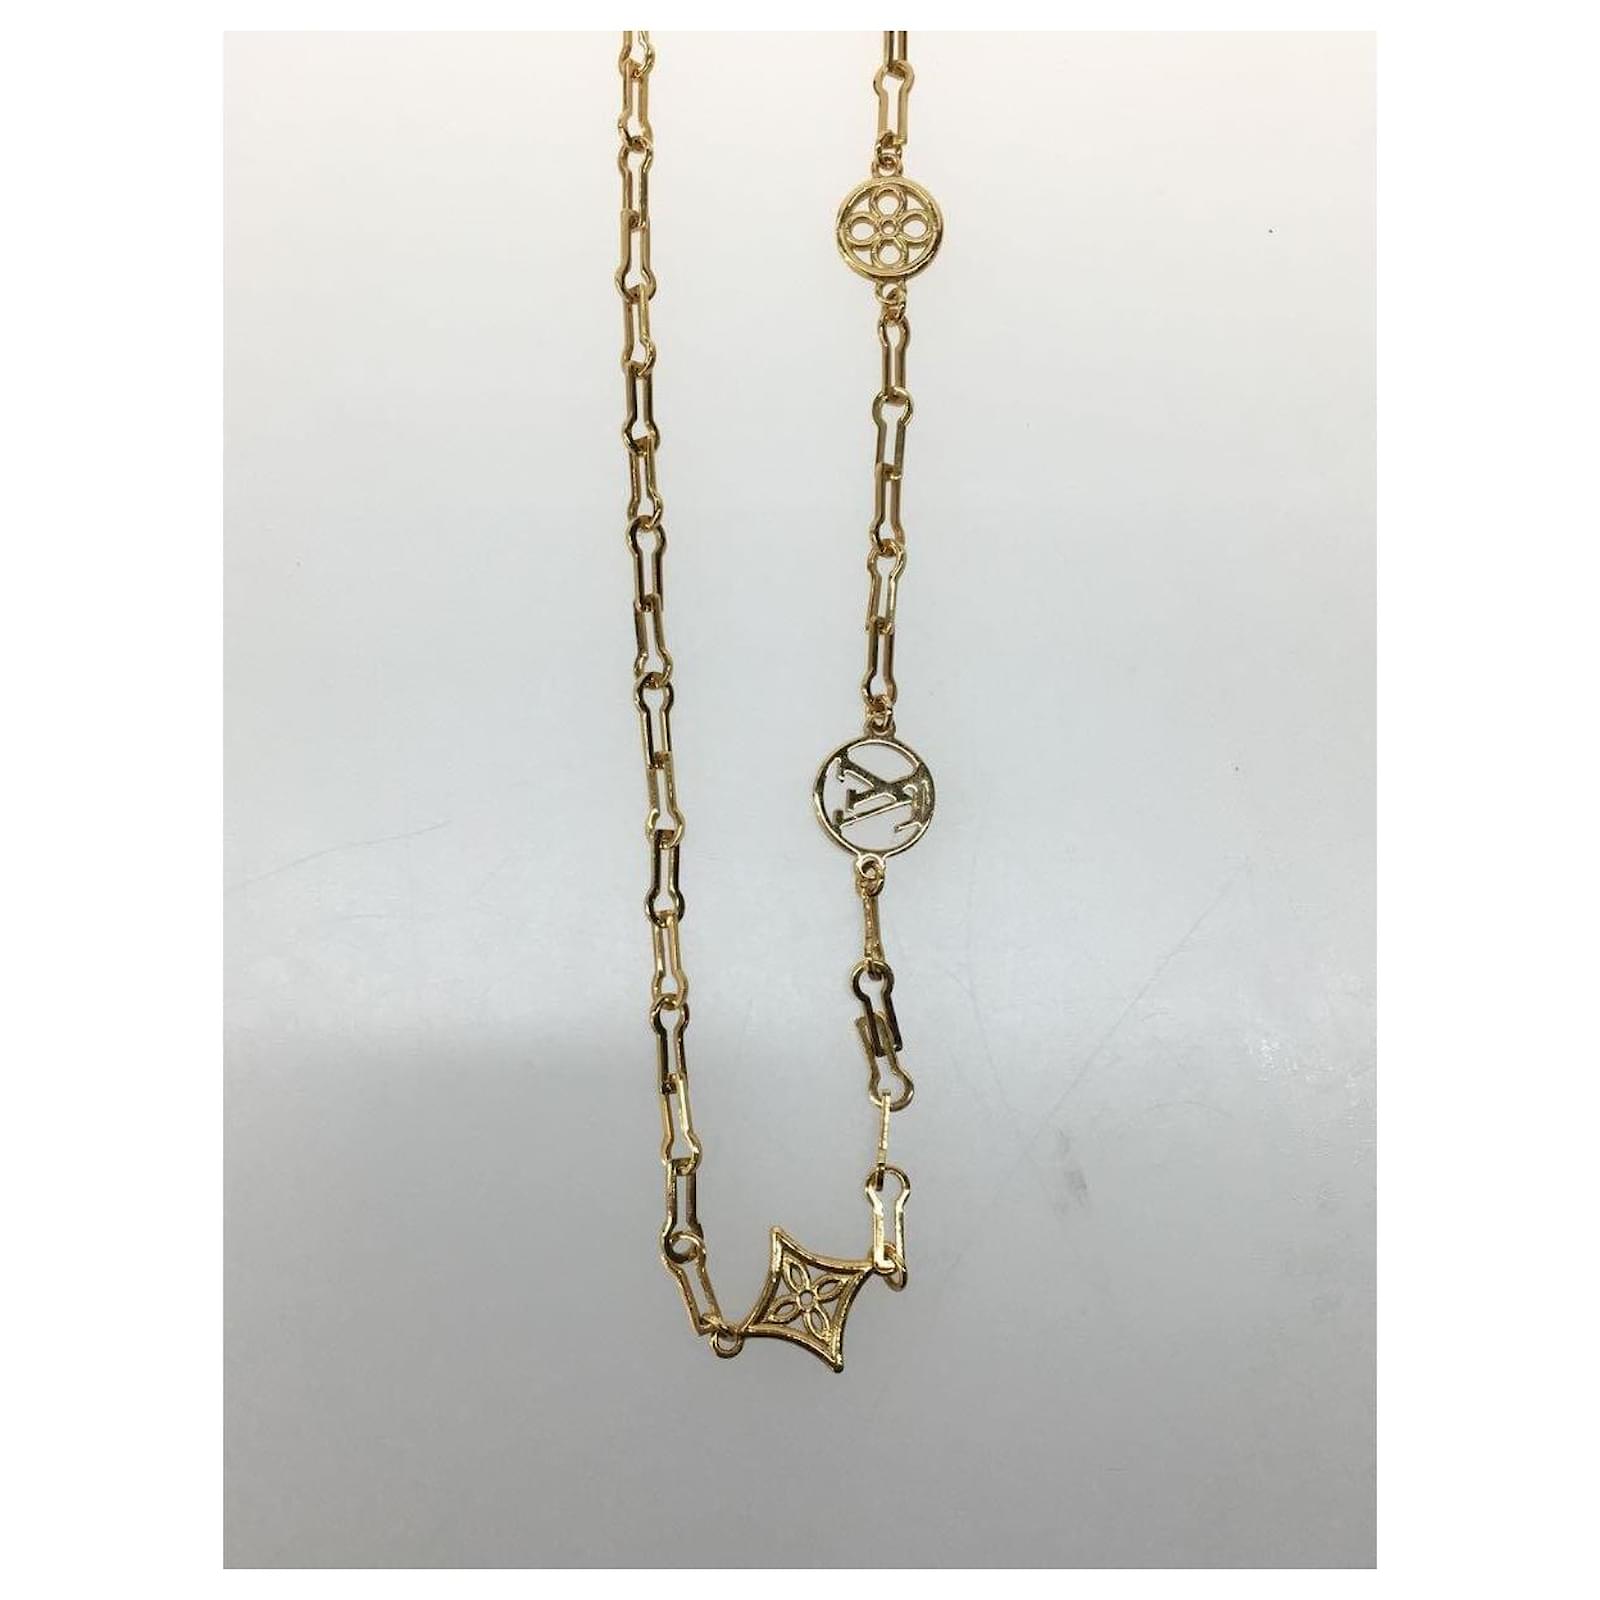 Authentic LOUIS VUITTON Collier Forever Young M69622 Necklace  #260-006-002-3582